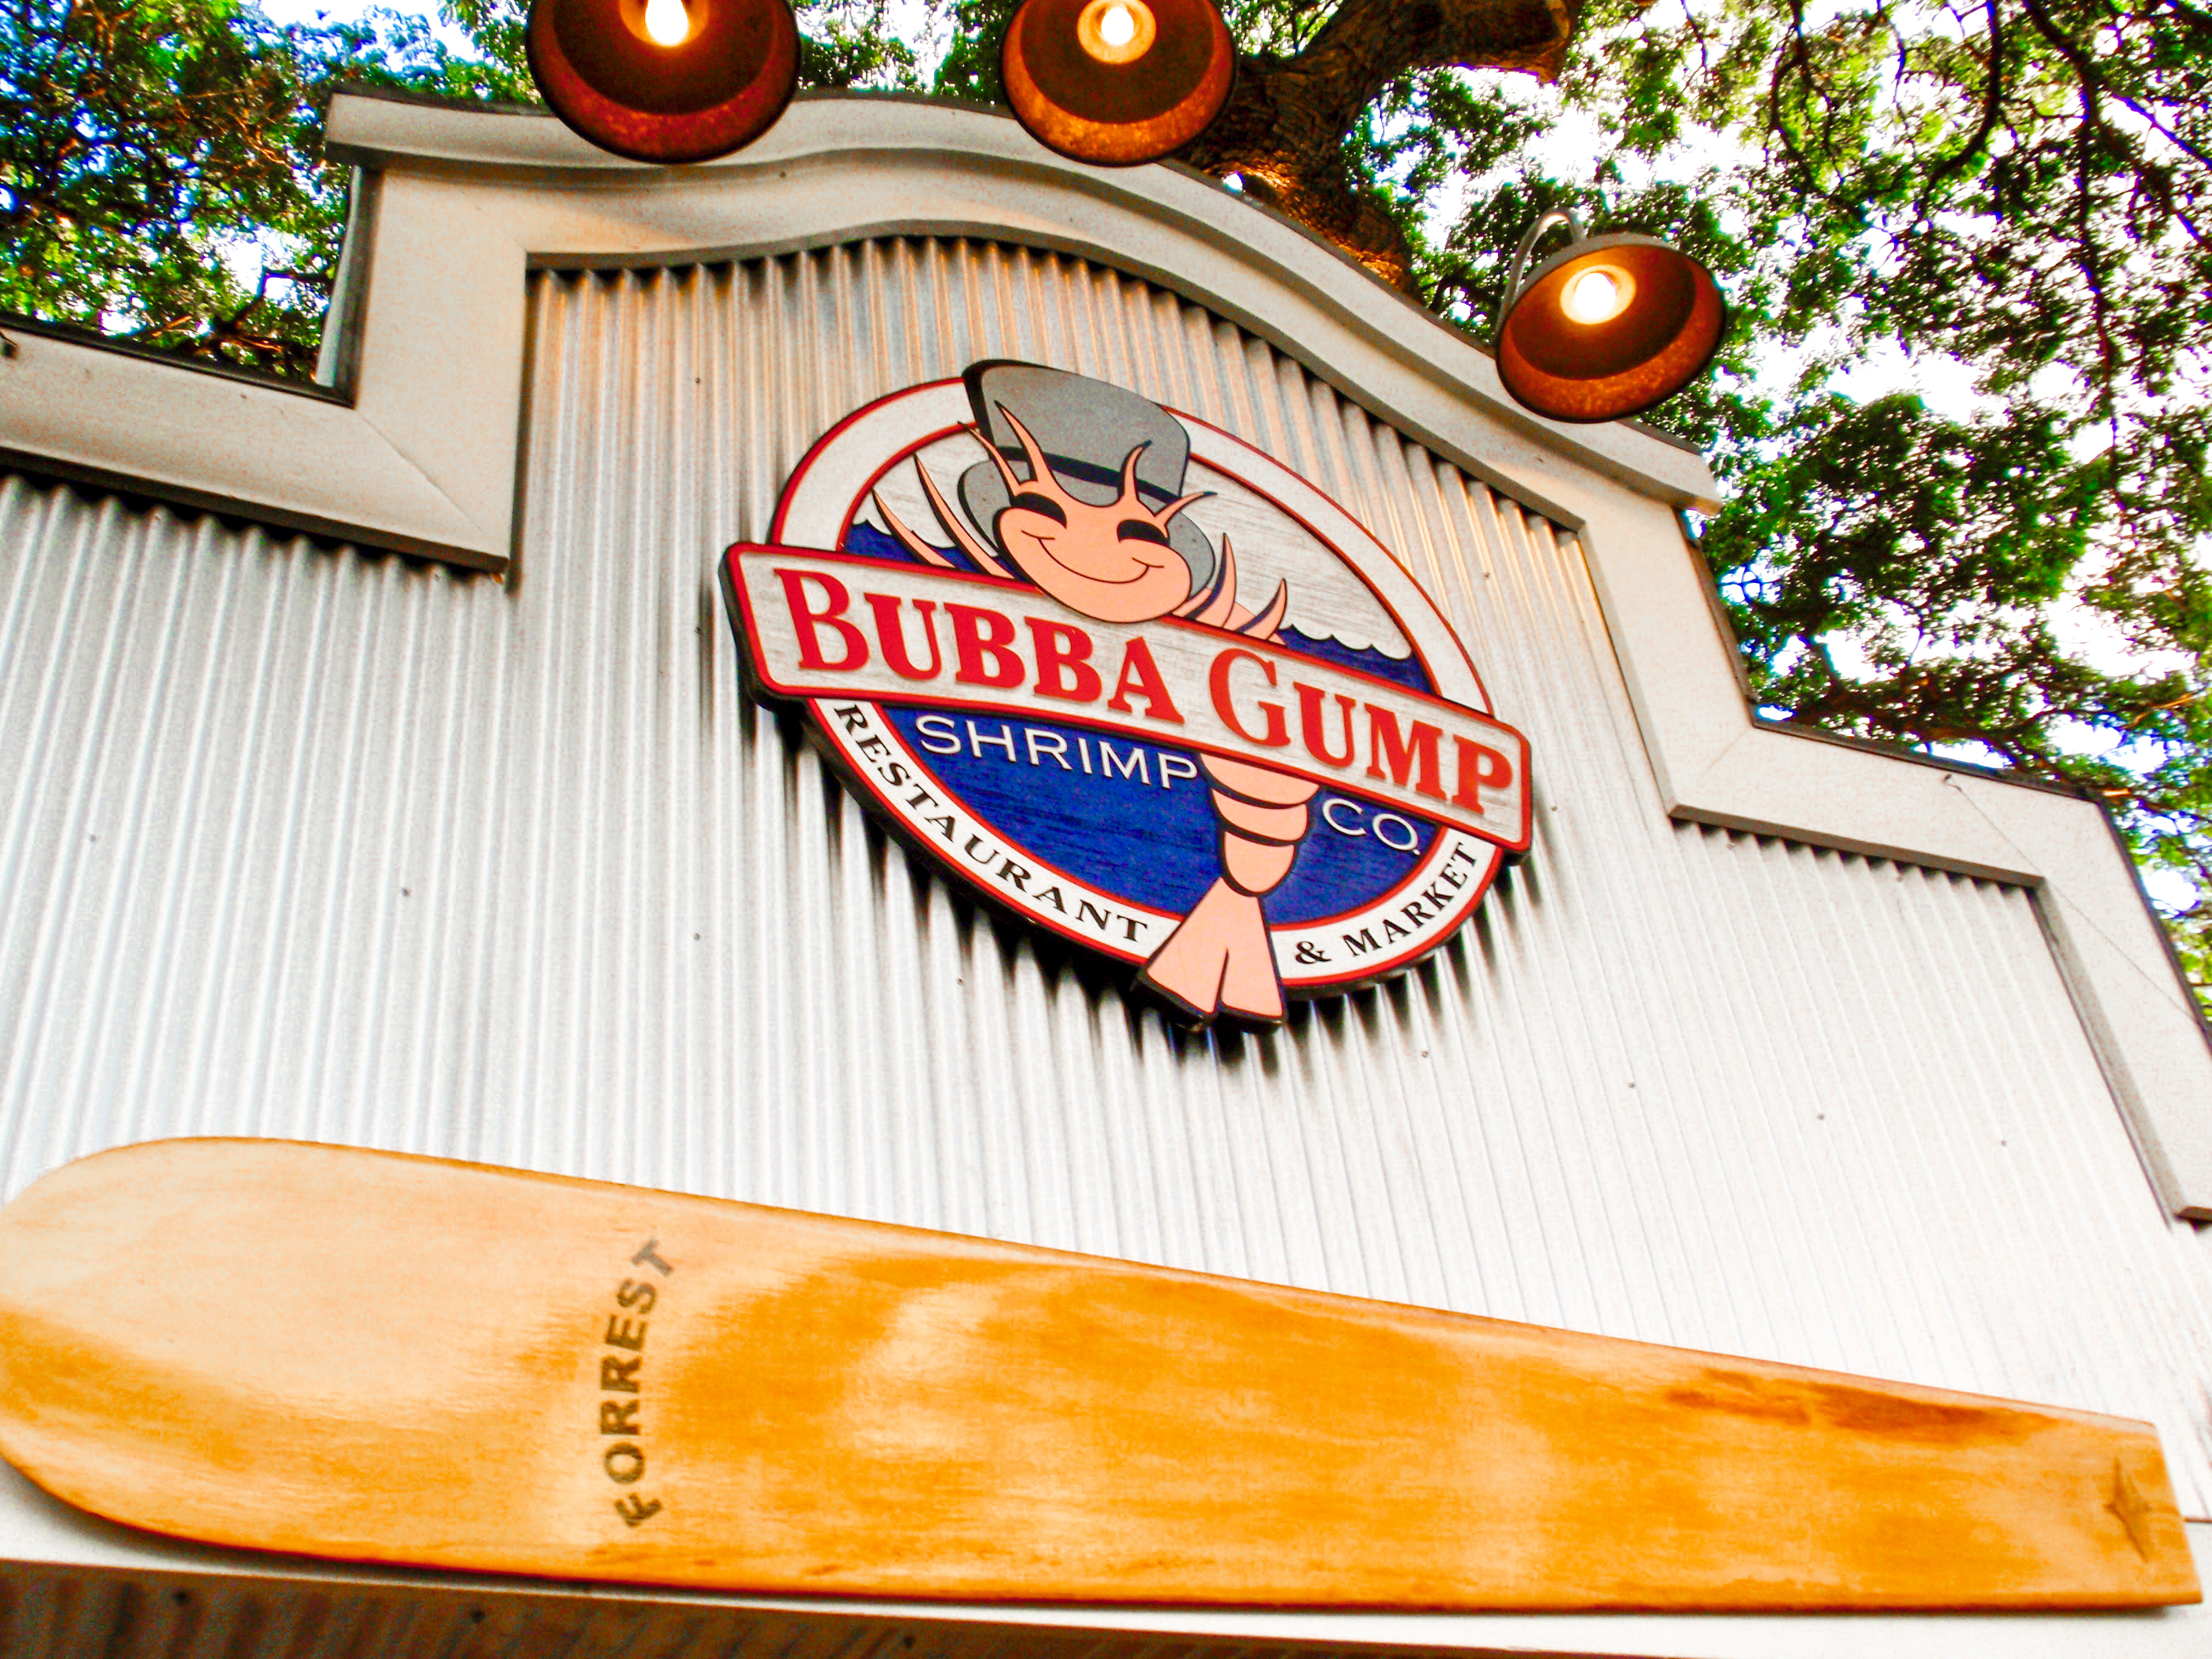 The sign from outside of Bubba Gump Shrimp Co. 